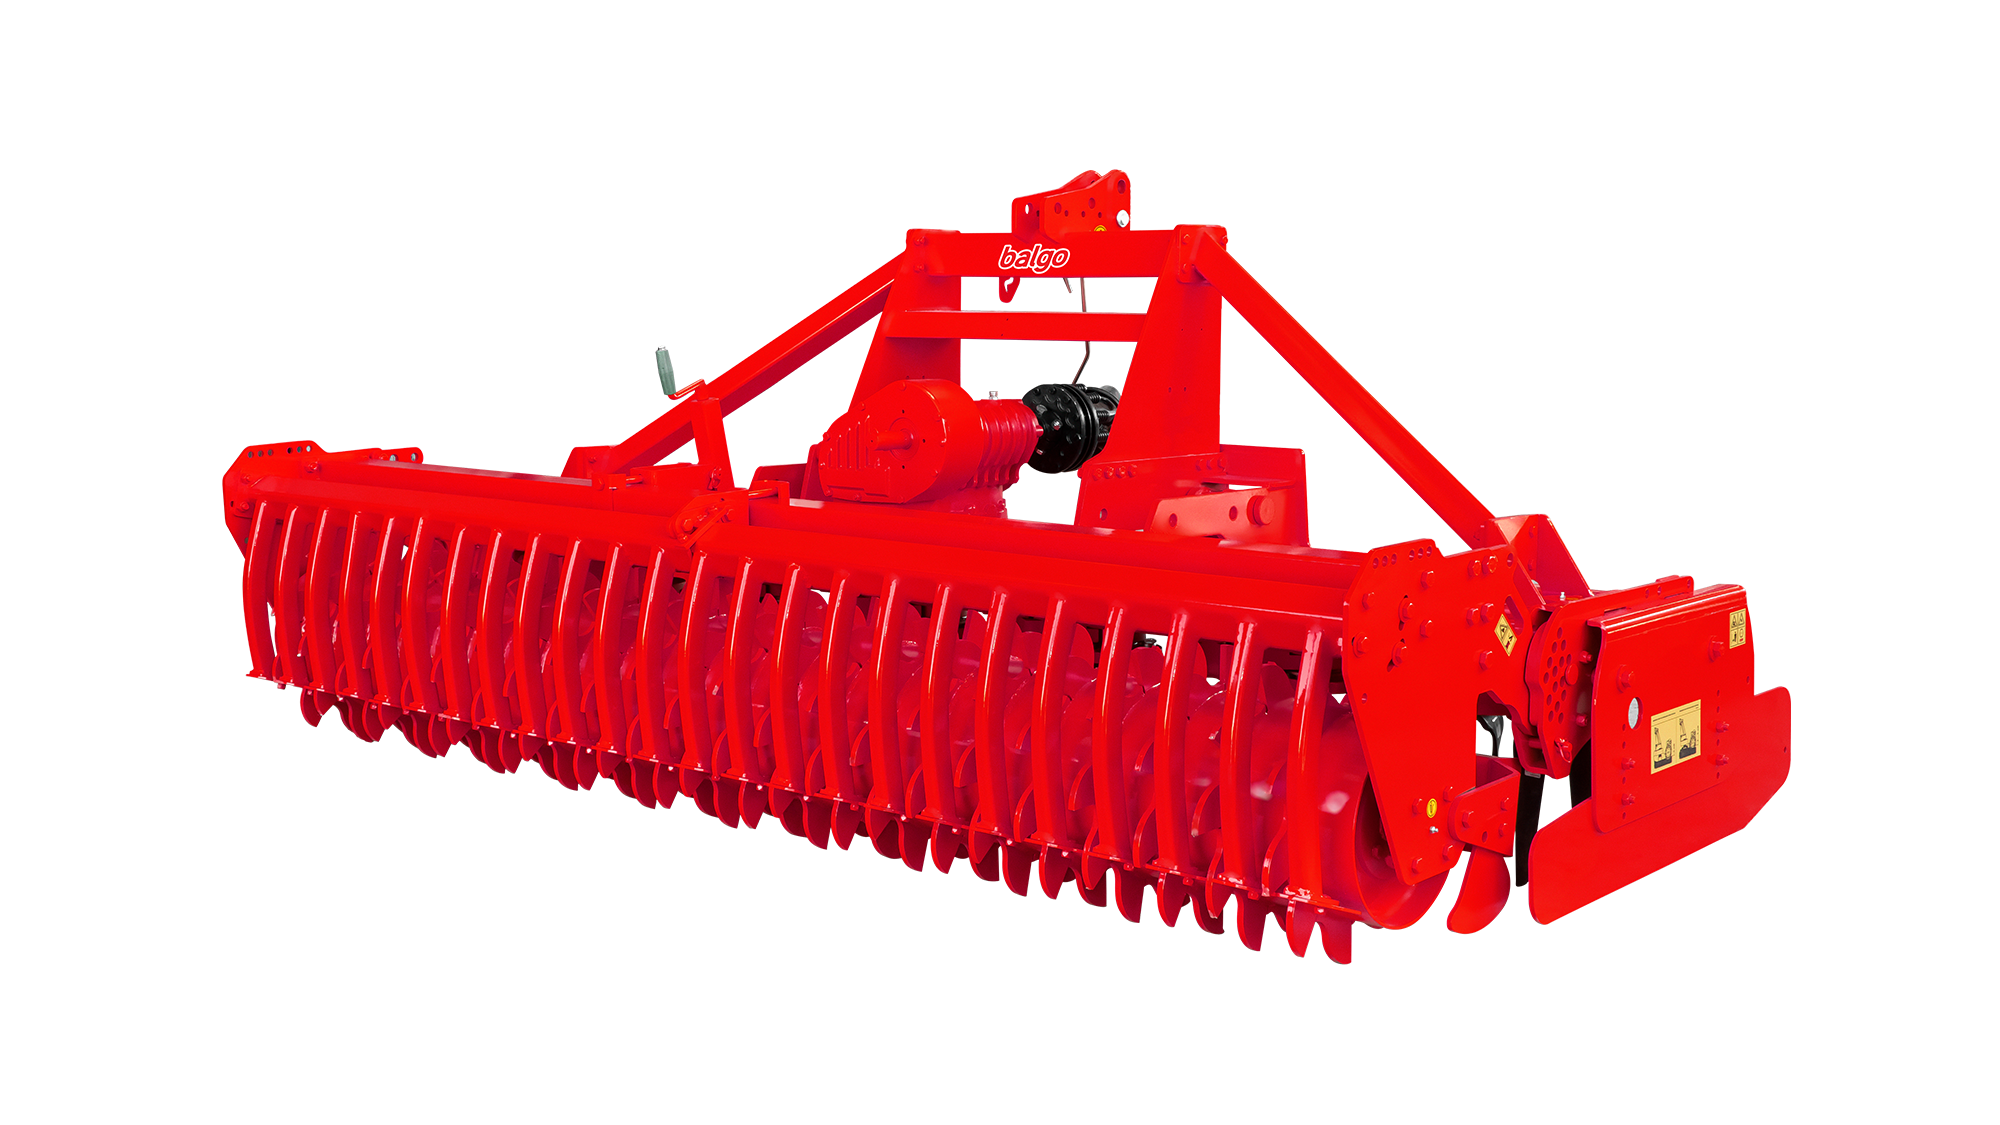  || Balgo Agricultural Machinery | Rotary Tiller, Variable Speed Rotary Tiller, Power Harrow, Agricultural Machinery Rotary Tiller, Garden Type Rotary Tiller, Garden Type Mini Rotary Tiller, Garden Type Mechanical Rotary Tiller, Garden Type Hydraulic Rotary Tiller, Field Type Rotary Tiller, Side Movement Mulcher, Hydraulic Mulcher, Double Sided Mulcher, Balgo Agricultural Machinery, Mulchers, Balgo Agricultural Machinery Inter Row Cultivator, Inter Row Cultivator, Flail Mower  Agricultural Machinery